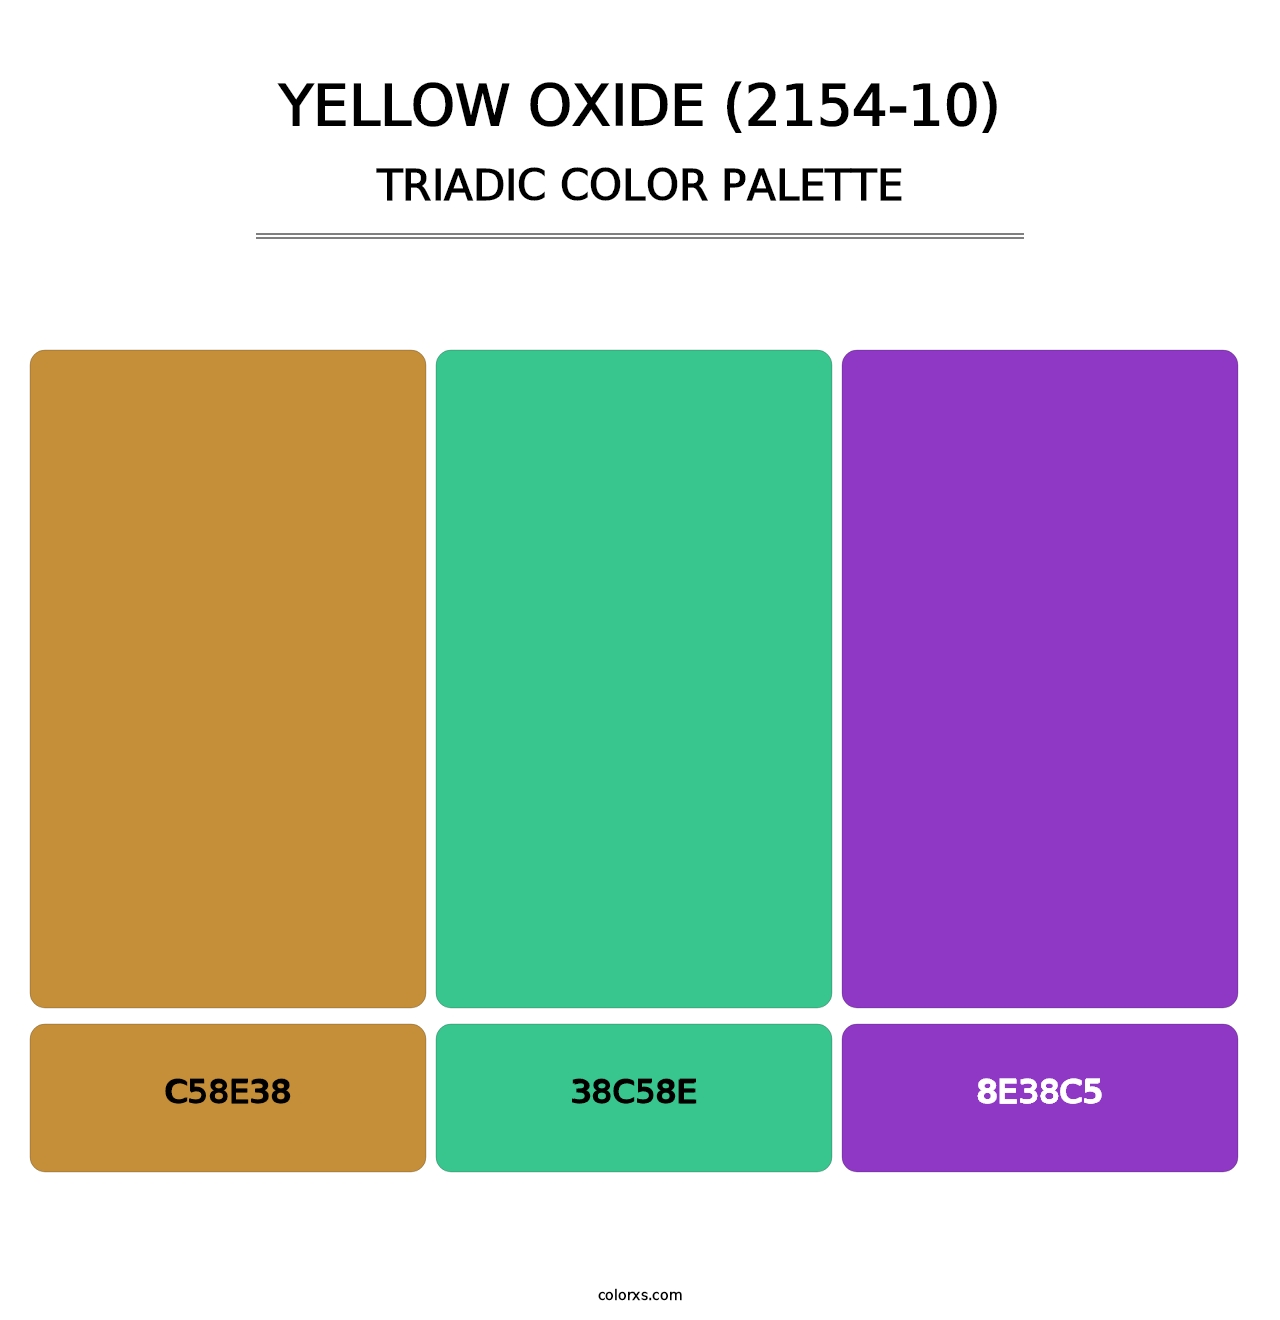 Yellow Oxide (2154-10) - Triadic Color Palette